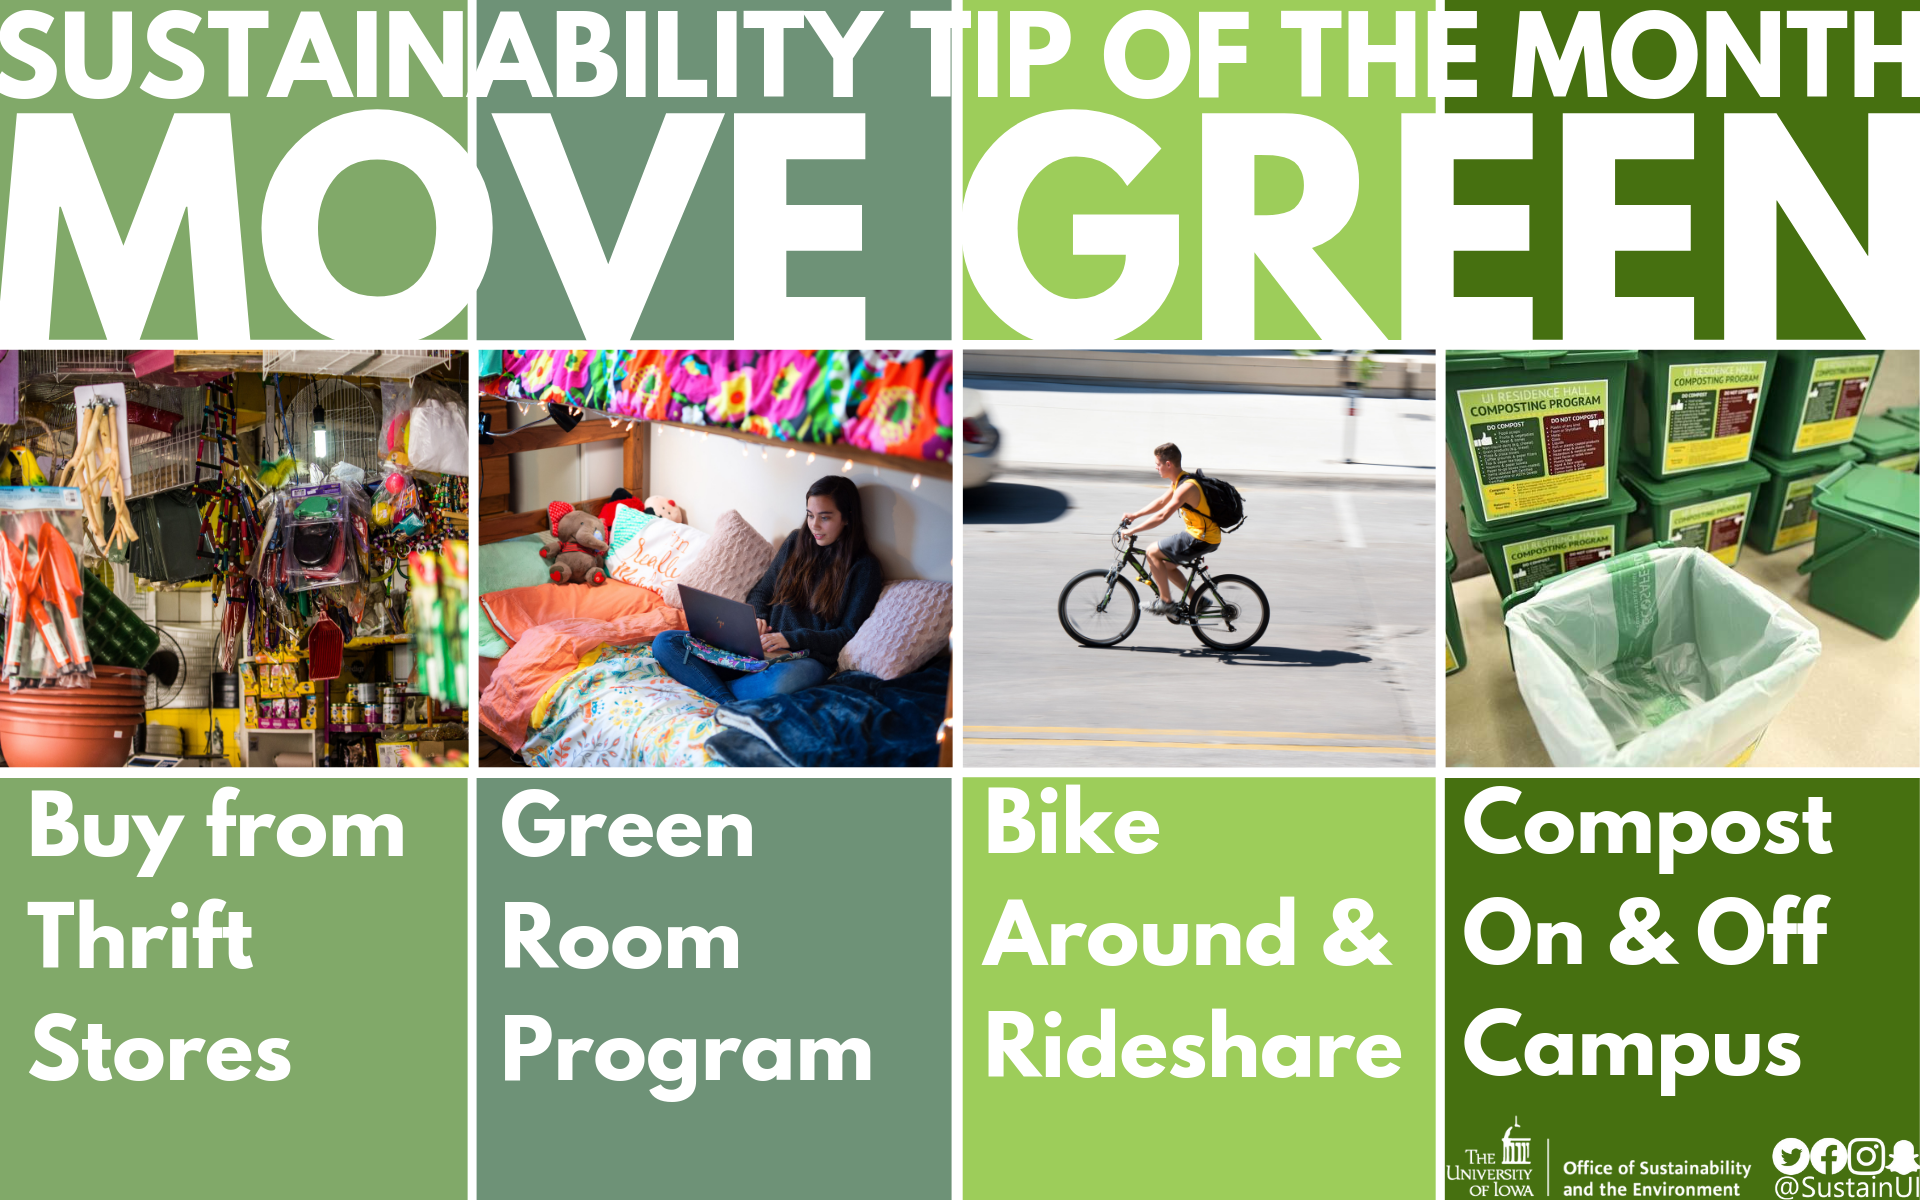 Sustainability tip of the month - Move Green: Buy from Thrift Stores; Green Room Program; Bike Around & Rideshare; Compost On & Off Campus. More at https://sustainability.uiowa.edu/eco-hawks